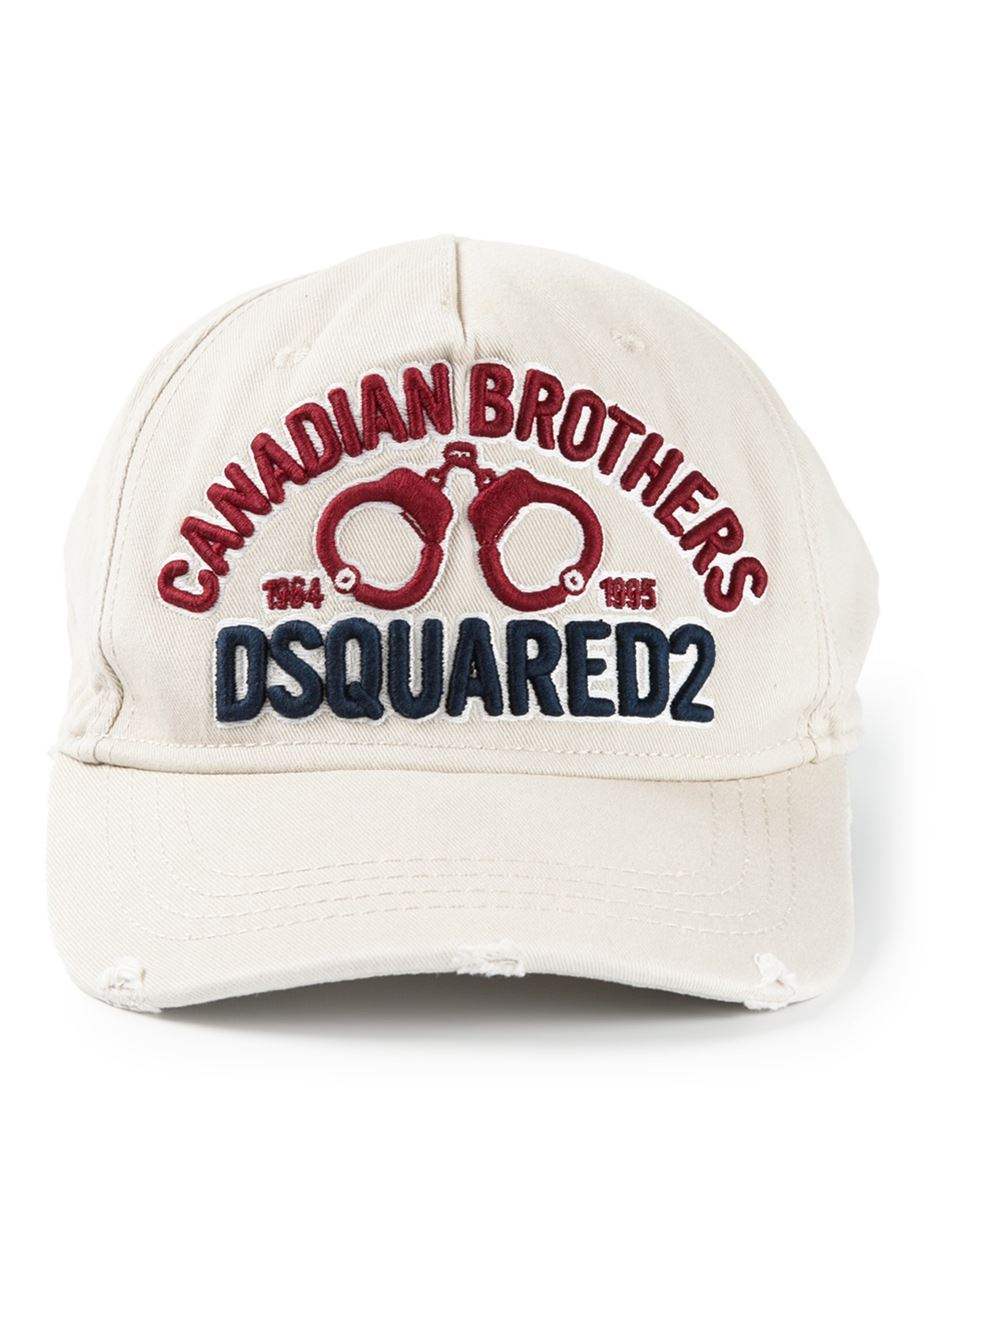 casquette dsquared2 canadian brothers